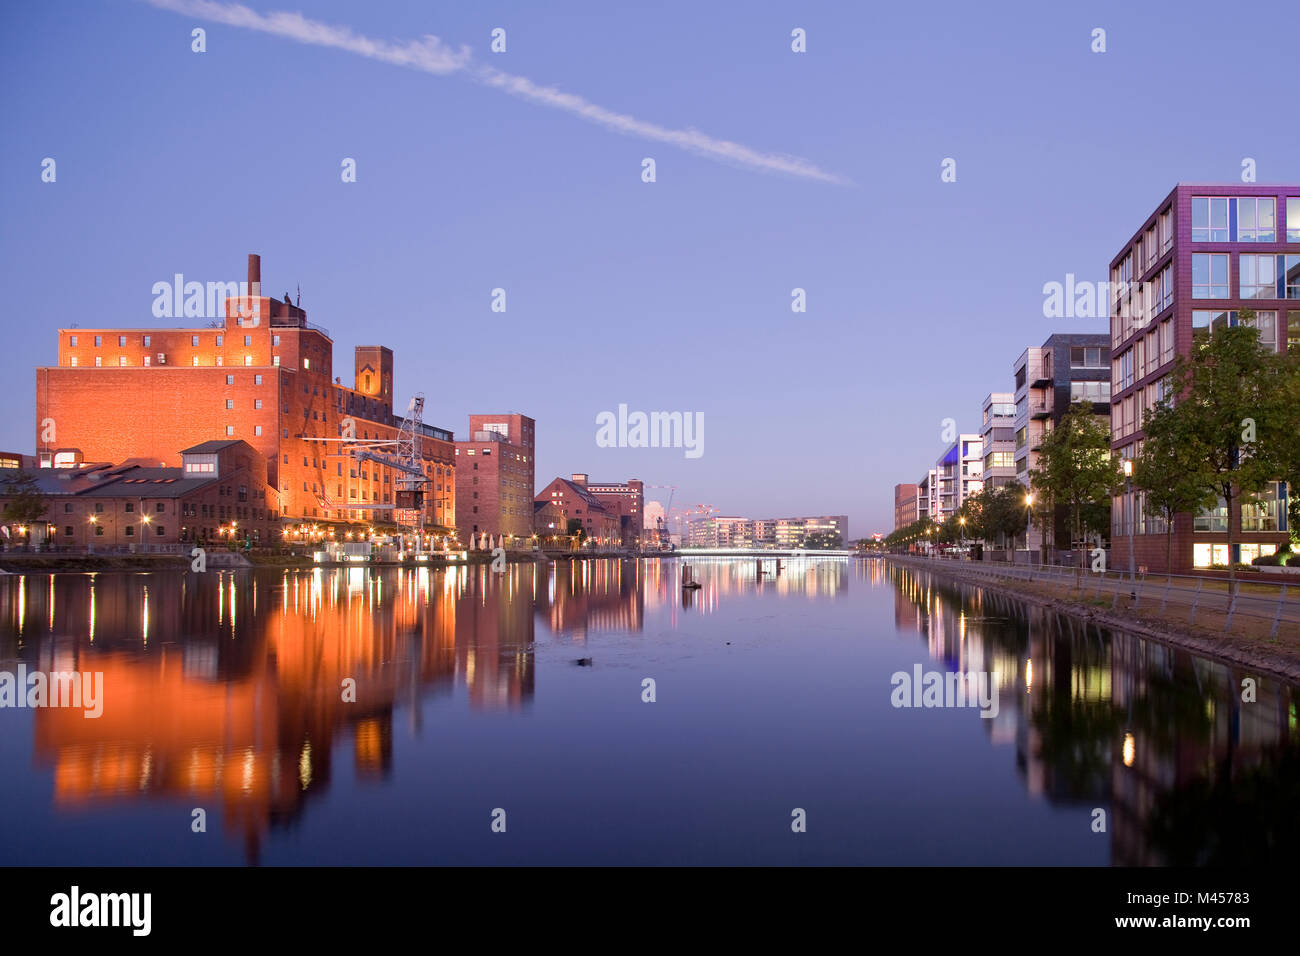 Old storehouses and modern office buildings face to face at the old harbour in Duisburg, Germany Stock Photo